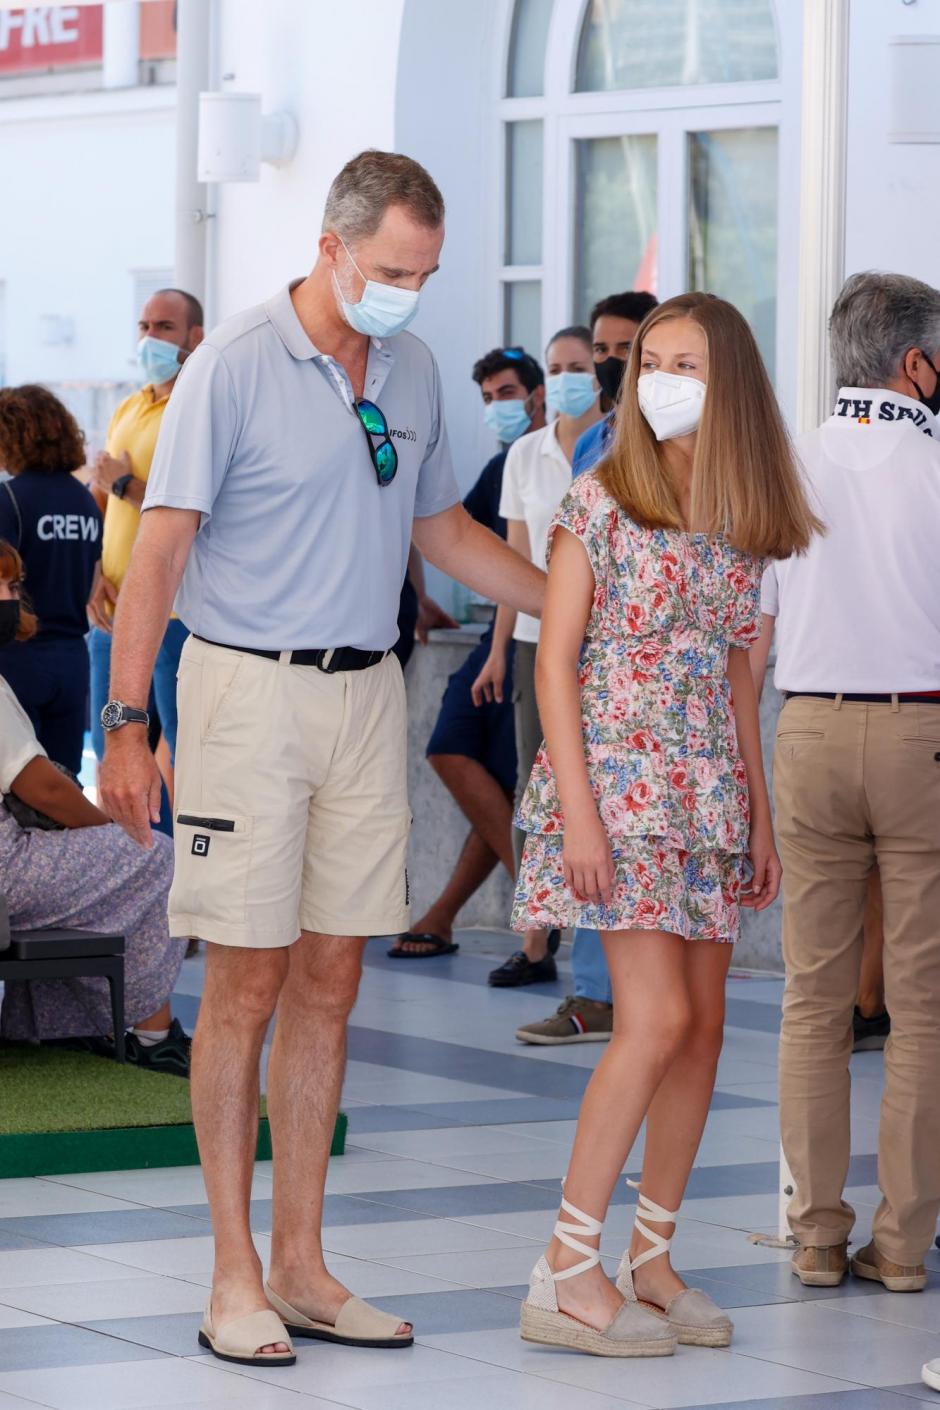 Spanish King Felipe VI and Princess of Asturias Leonor of Borbon during a visit to Nautical Club on occasion of 39 edition of Copa del Rey de Vela  in Mallorca, on Saturday 07 August 2021.